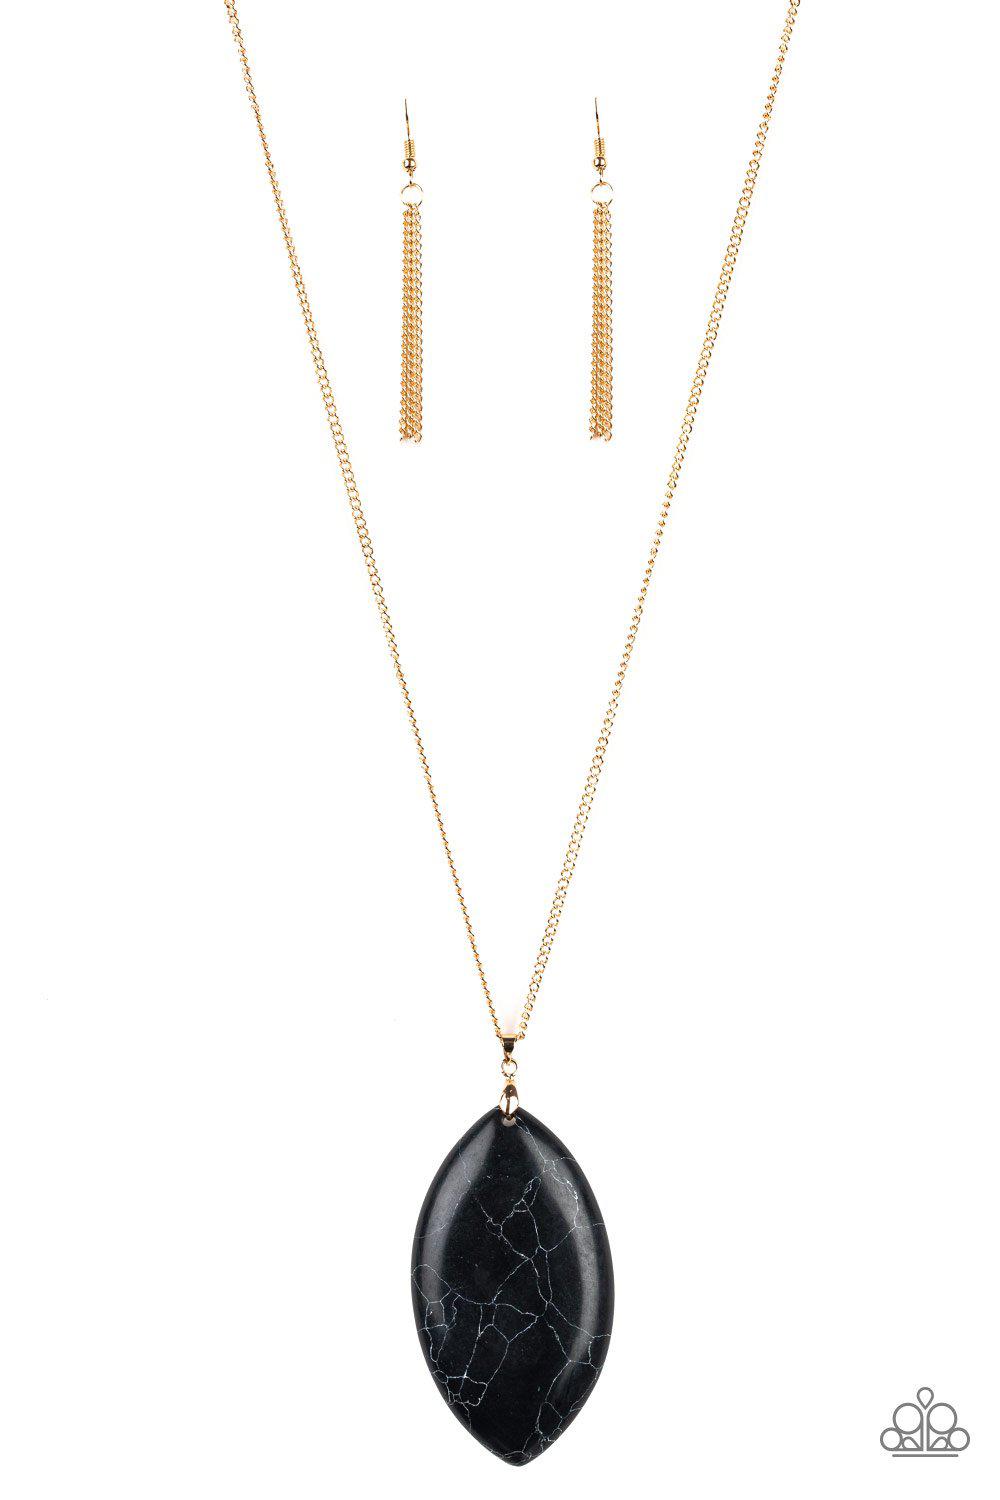 Santa Fe Simplicity Gold and Black Stone Pendant Necklace - Paparazzi Accessories-CarasShop.com - $5 Jewelry by Cara Jewels